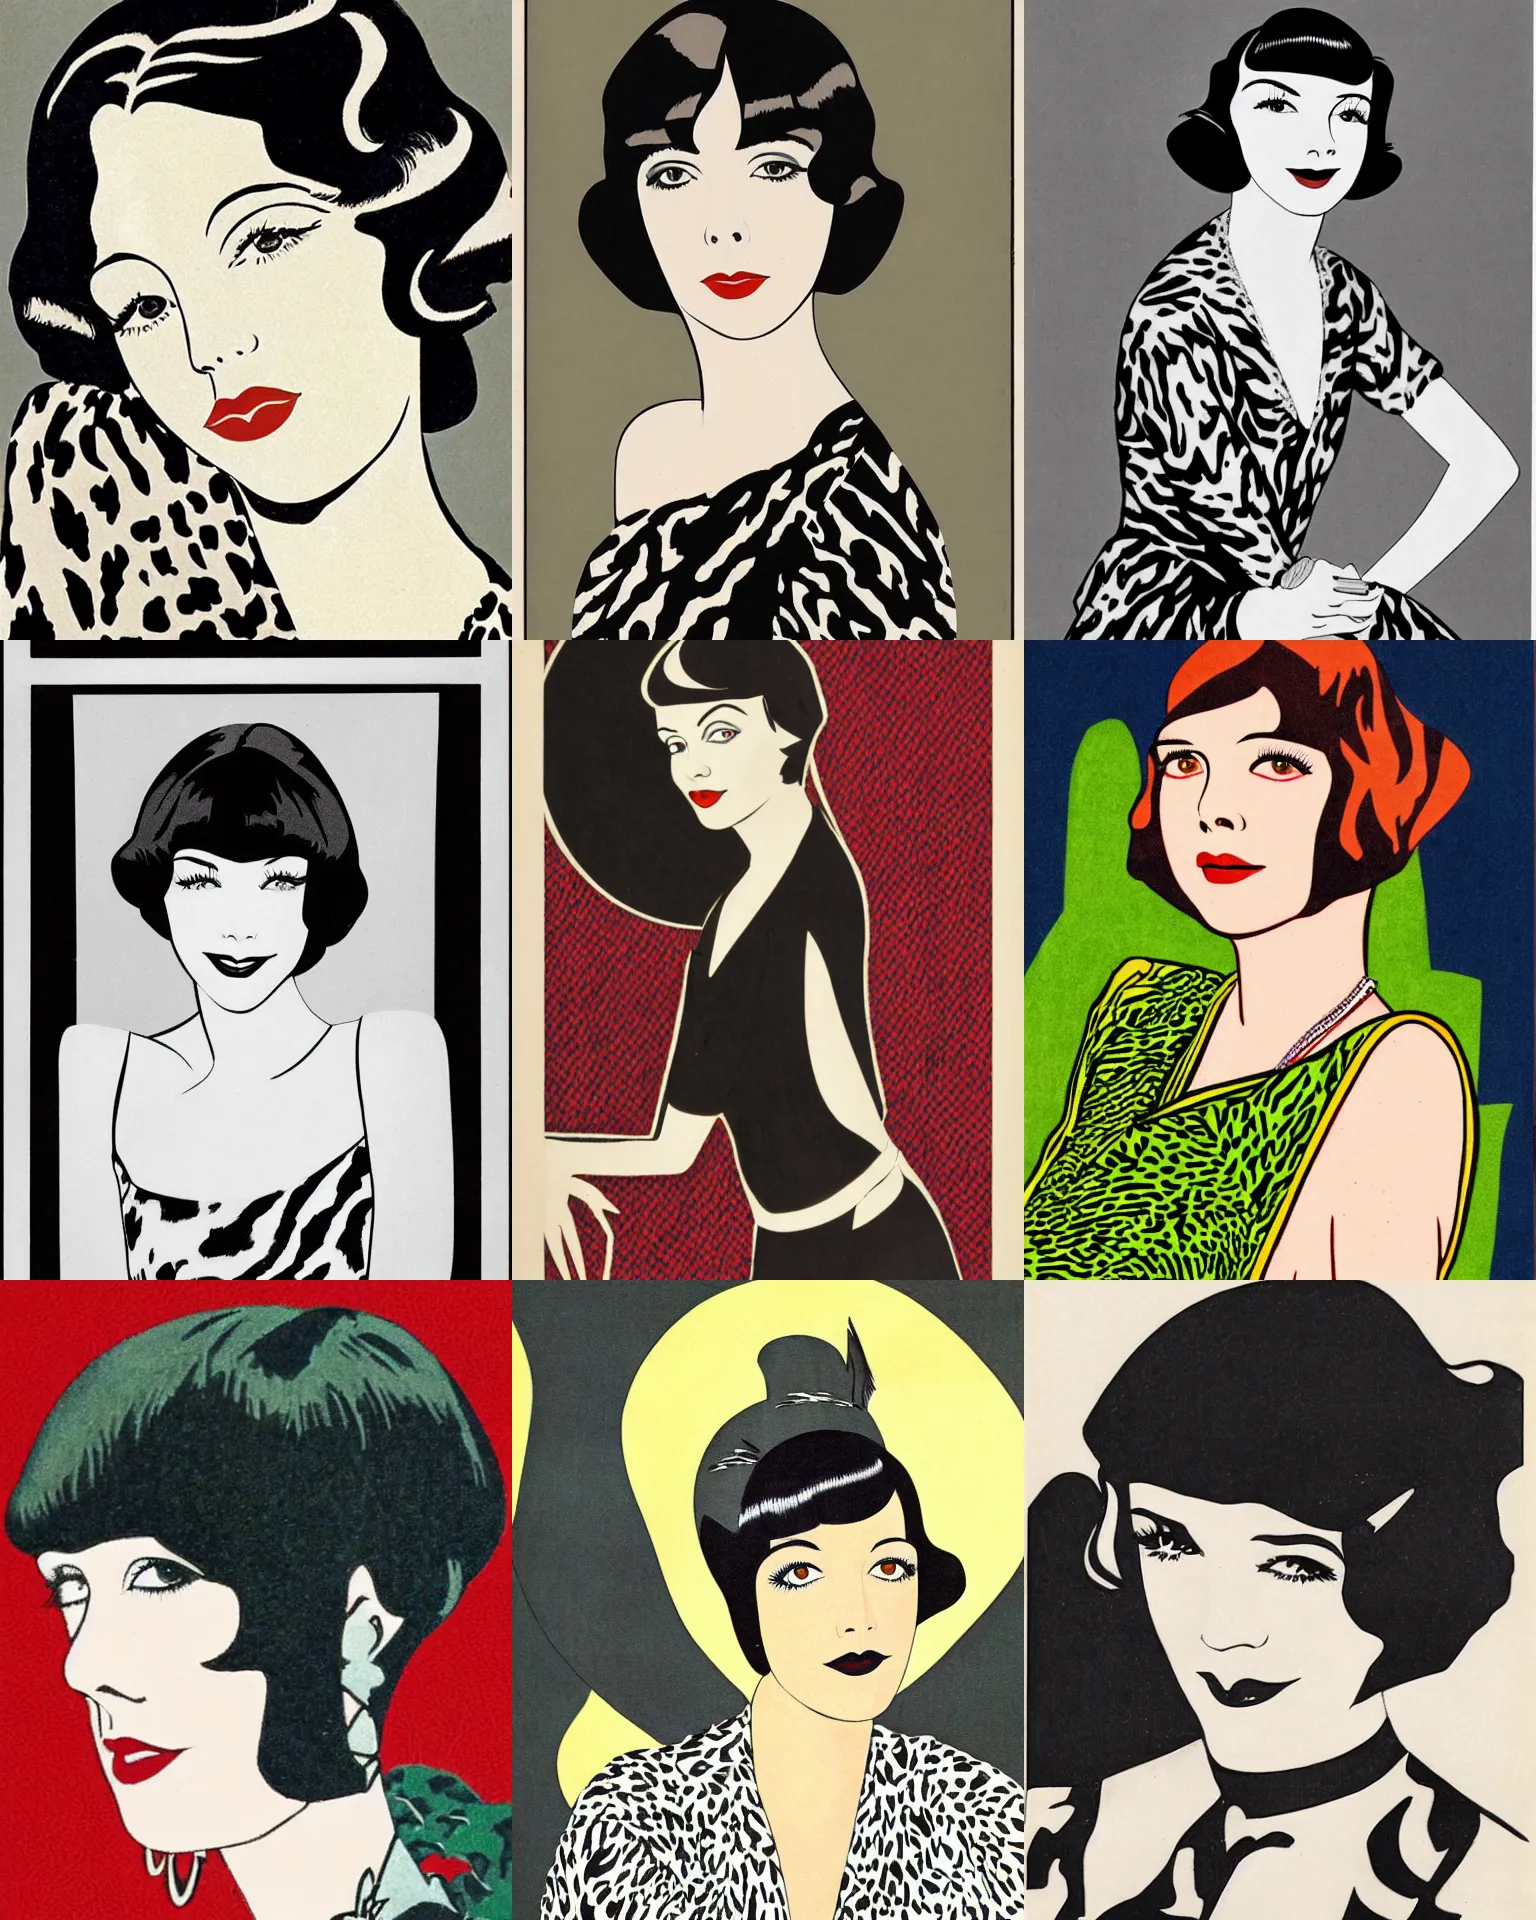 Prompt: Colleen Moore 25 years old, bob haircut, portrait by Patrick Nagel, 1920s, patterned animal print